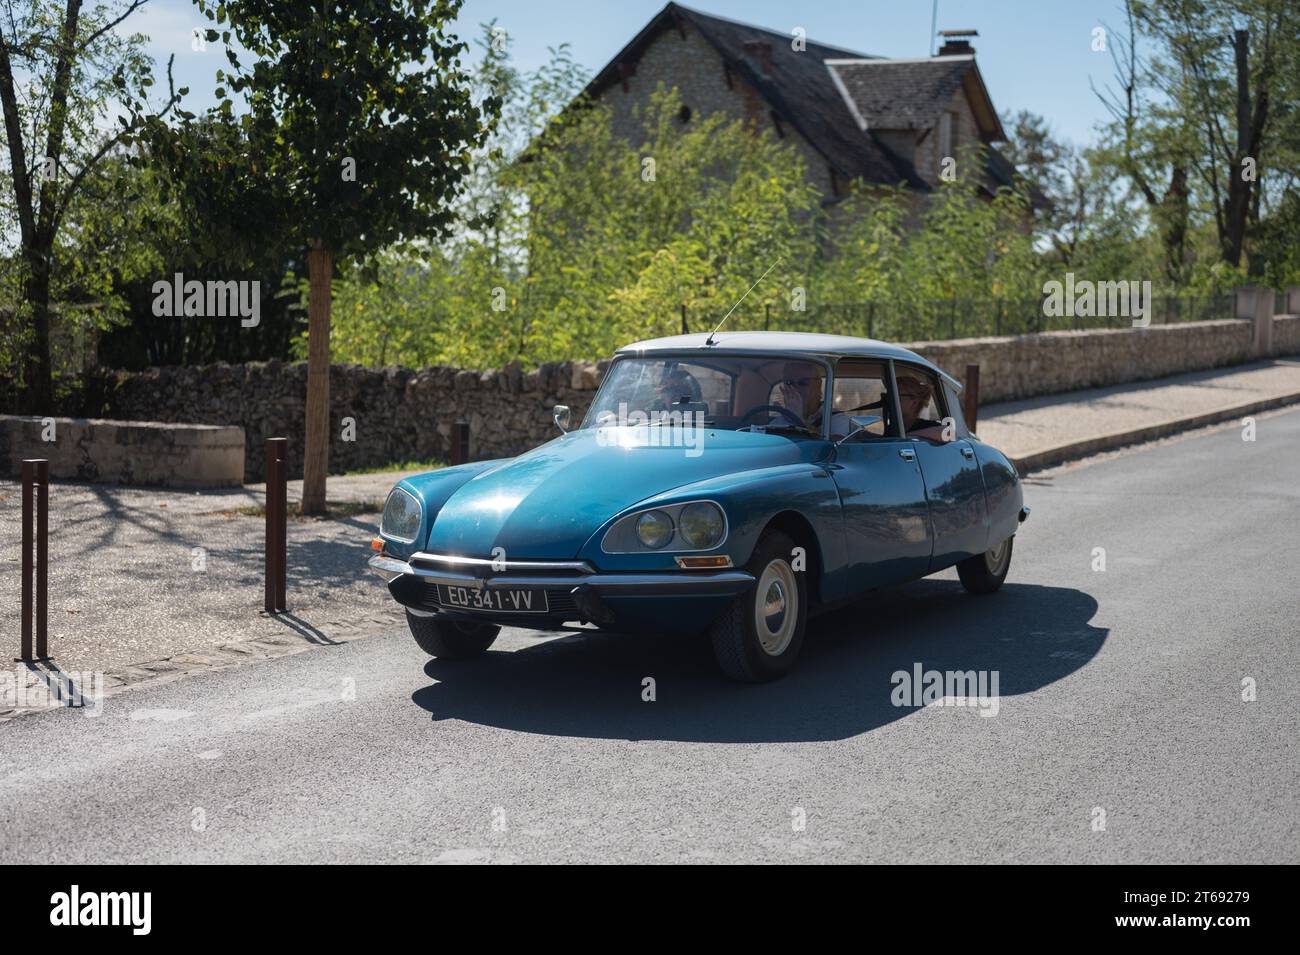 A beautiful classic blue Citroen DS with a white roof driving through a French town Stock Photo